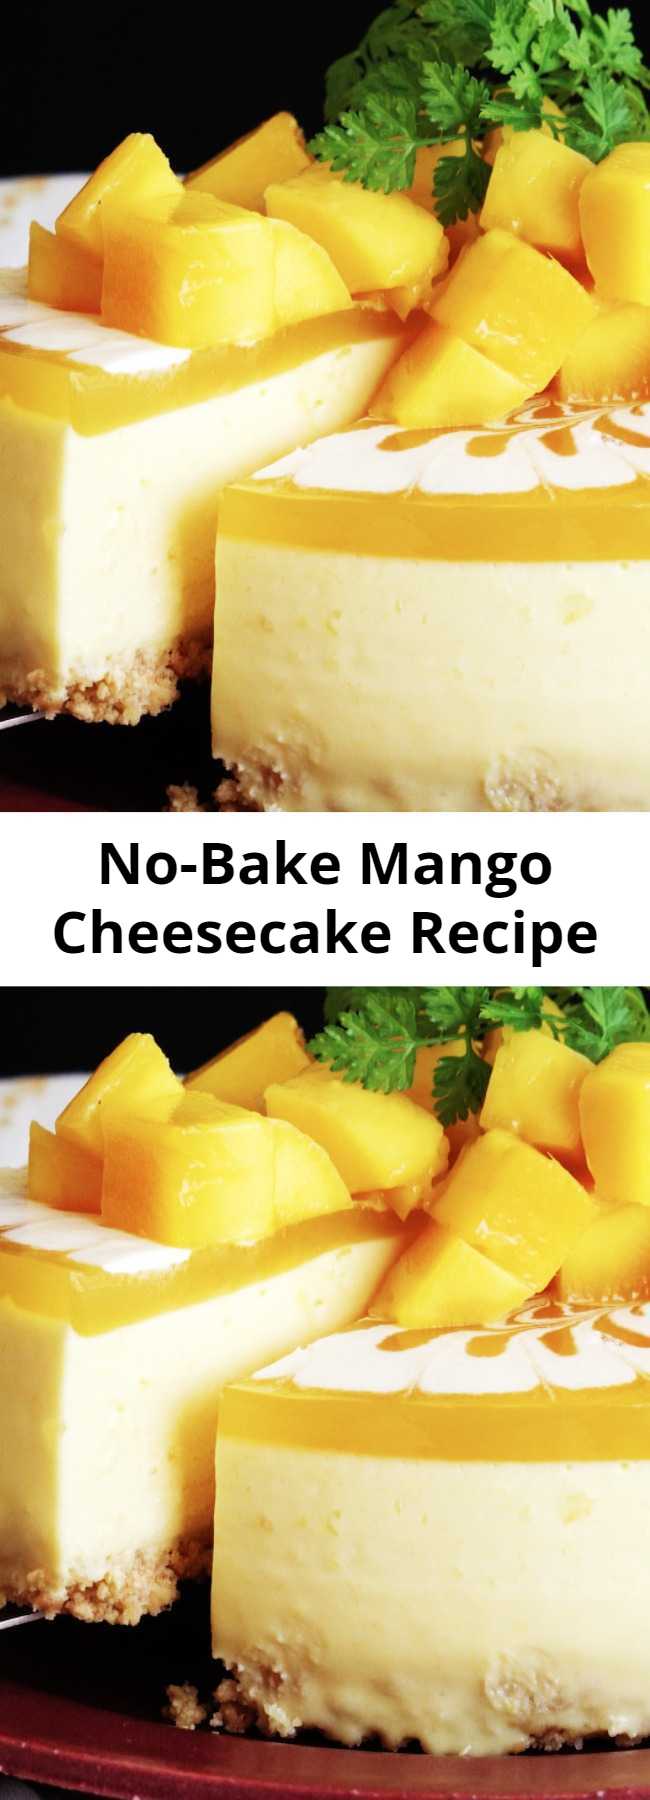 No-Bake Mango Cheesecake Recipe - Let this Mango Cheesecake take you to sweet, fruit paradise. Super easy and no bake makes this the perfect summer dessert.